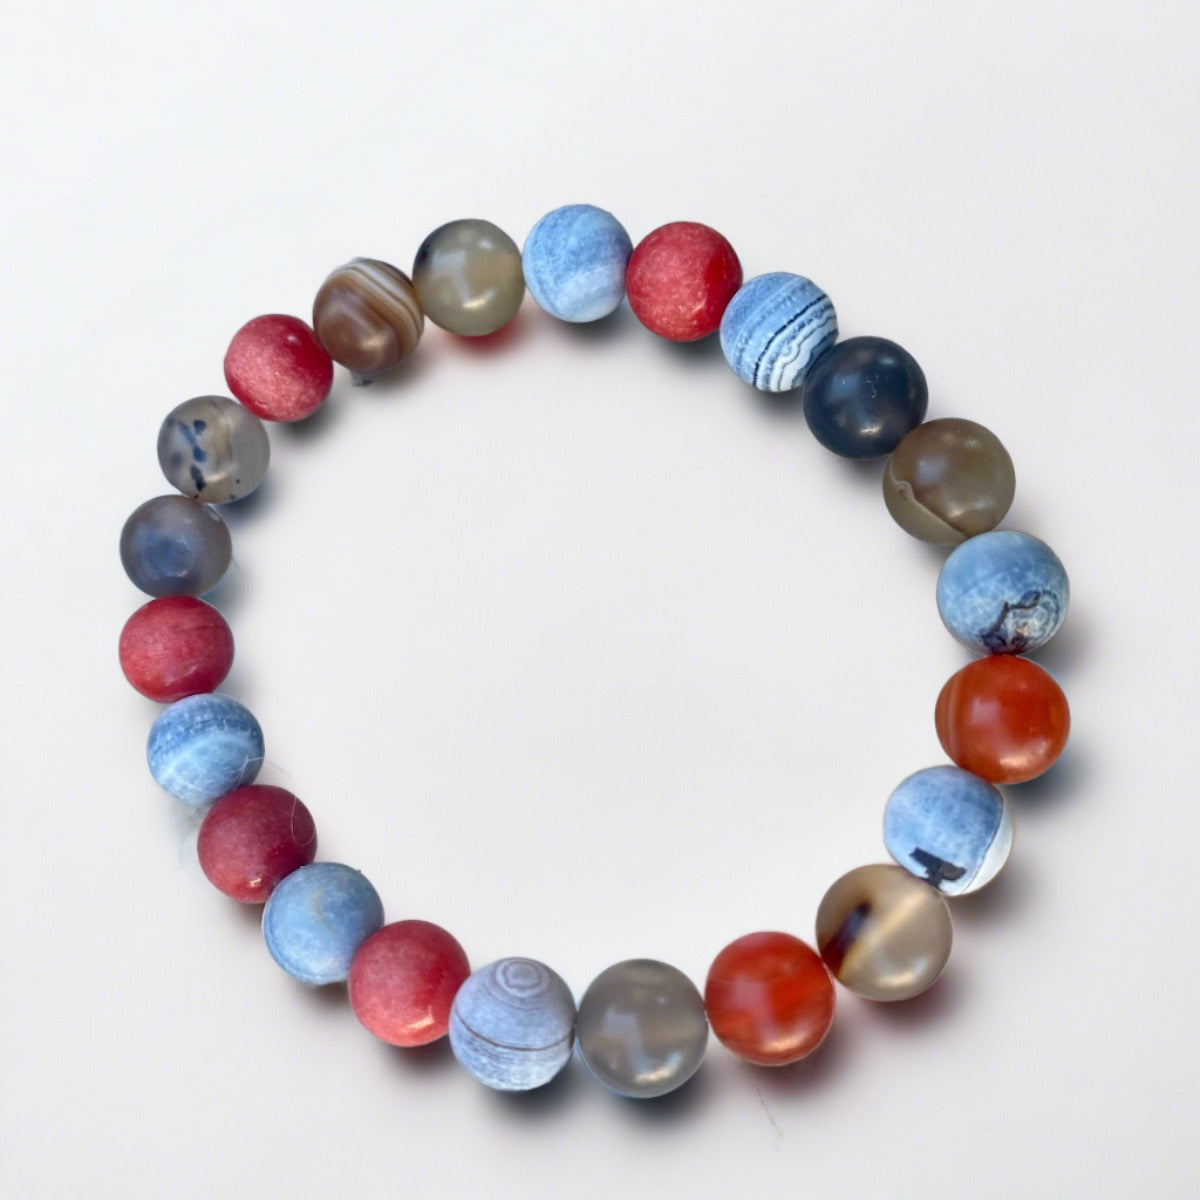 Matte carnelian and agate red, blue, and tan mala bracelet for self-confidence